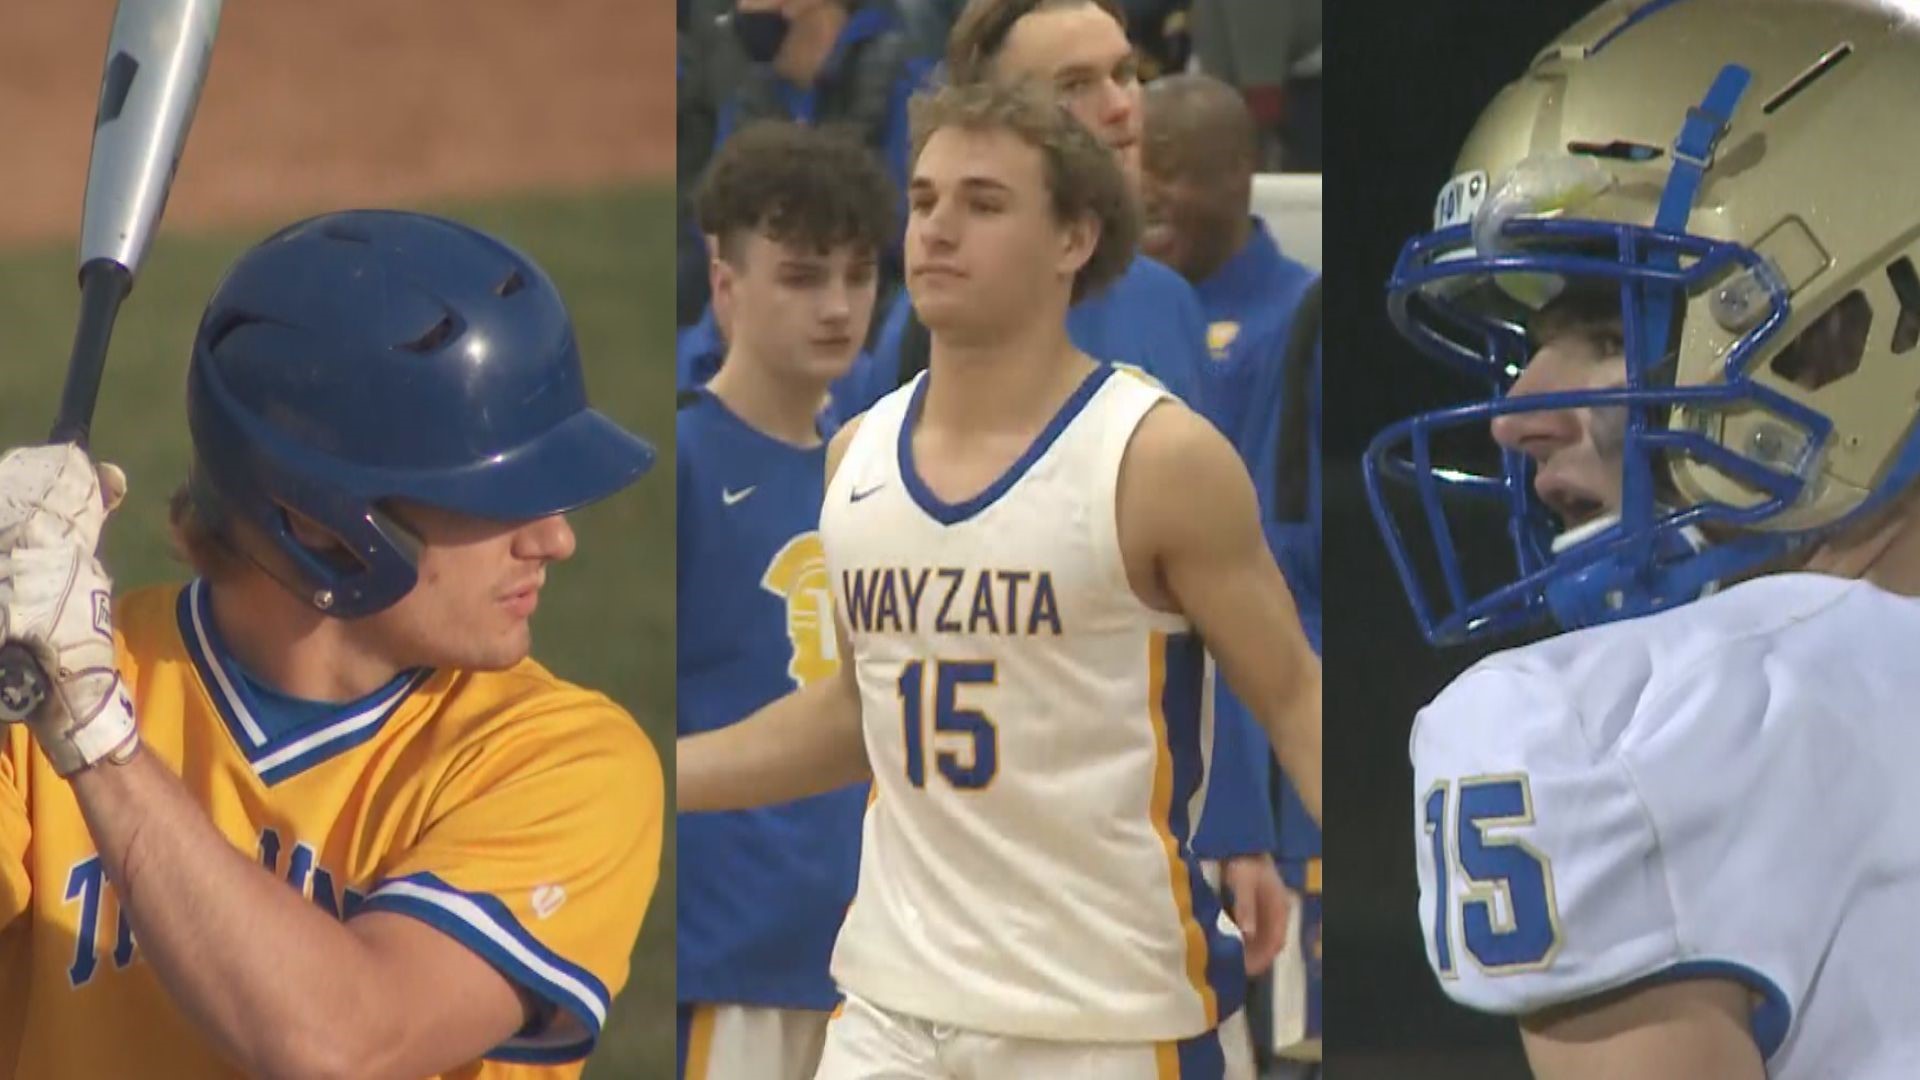 In 2019, Berkland and Wayzata earned a state title in football. Then in 2021, they claimed a state crown in basketball.